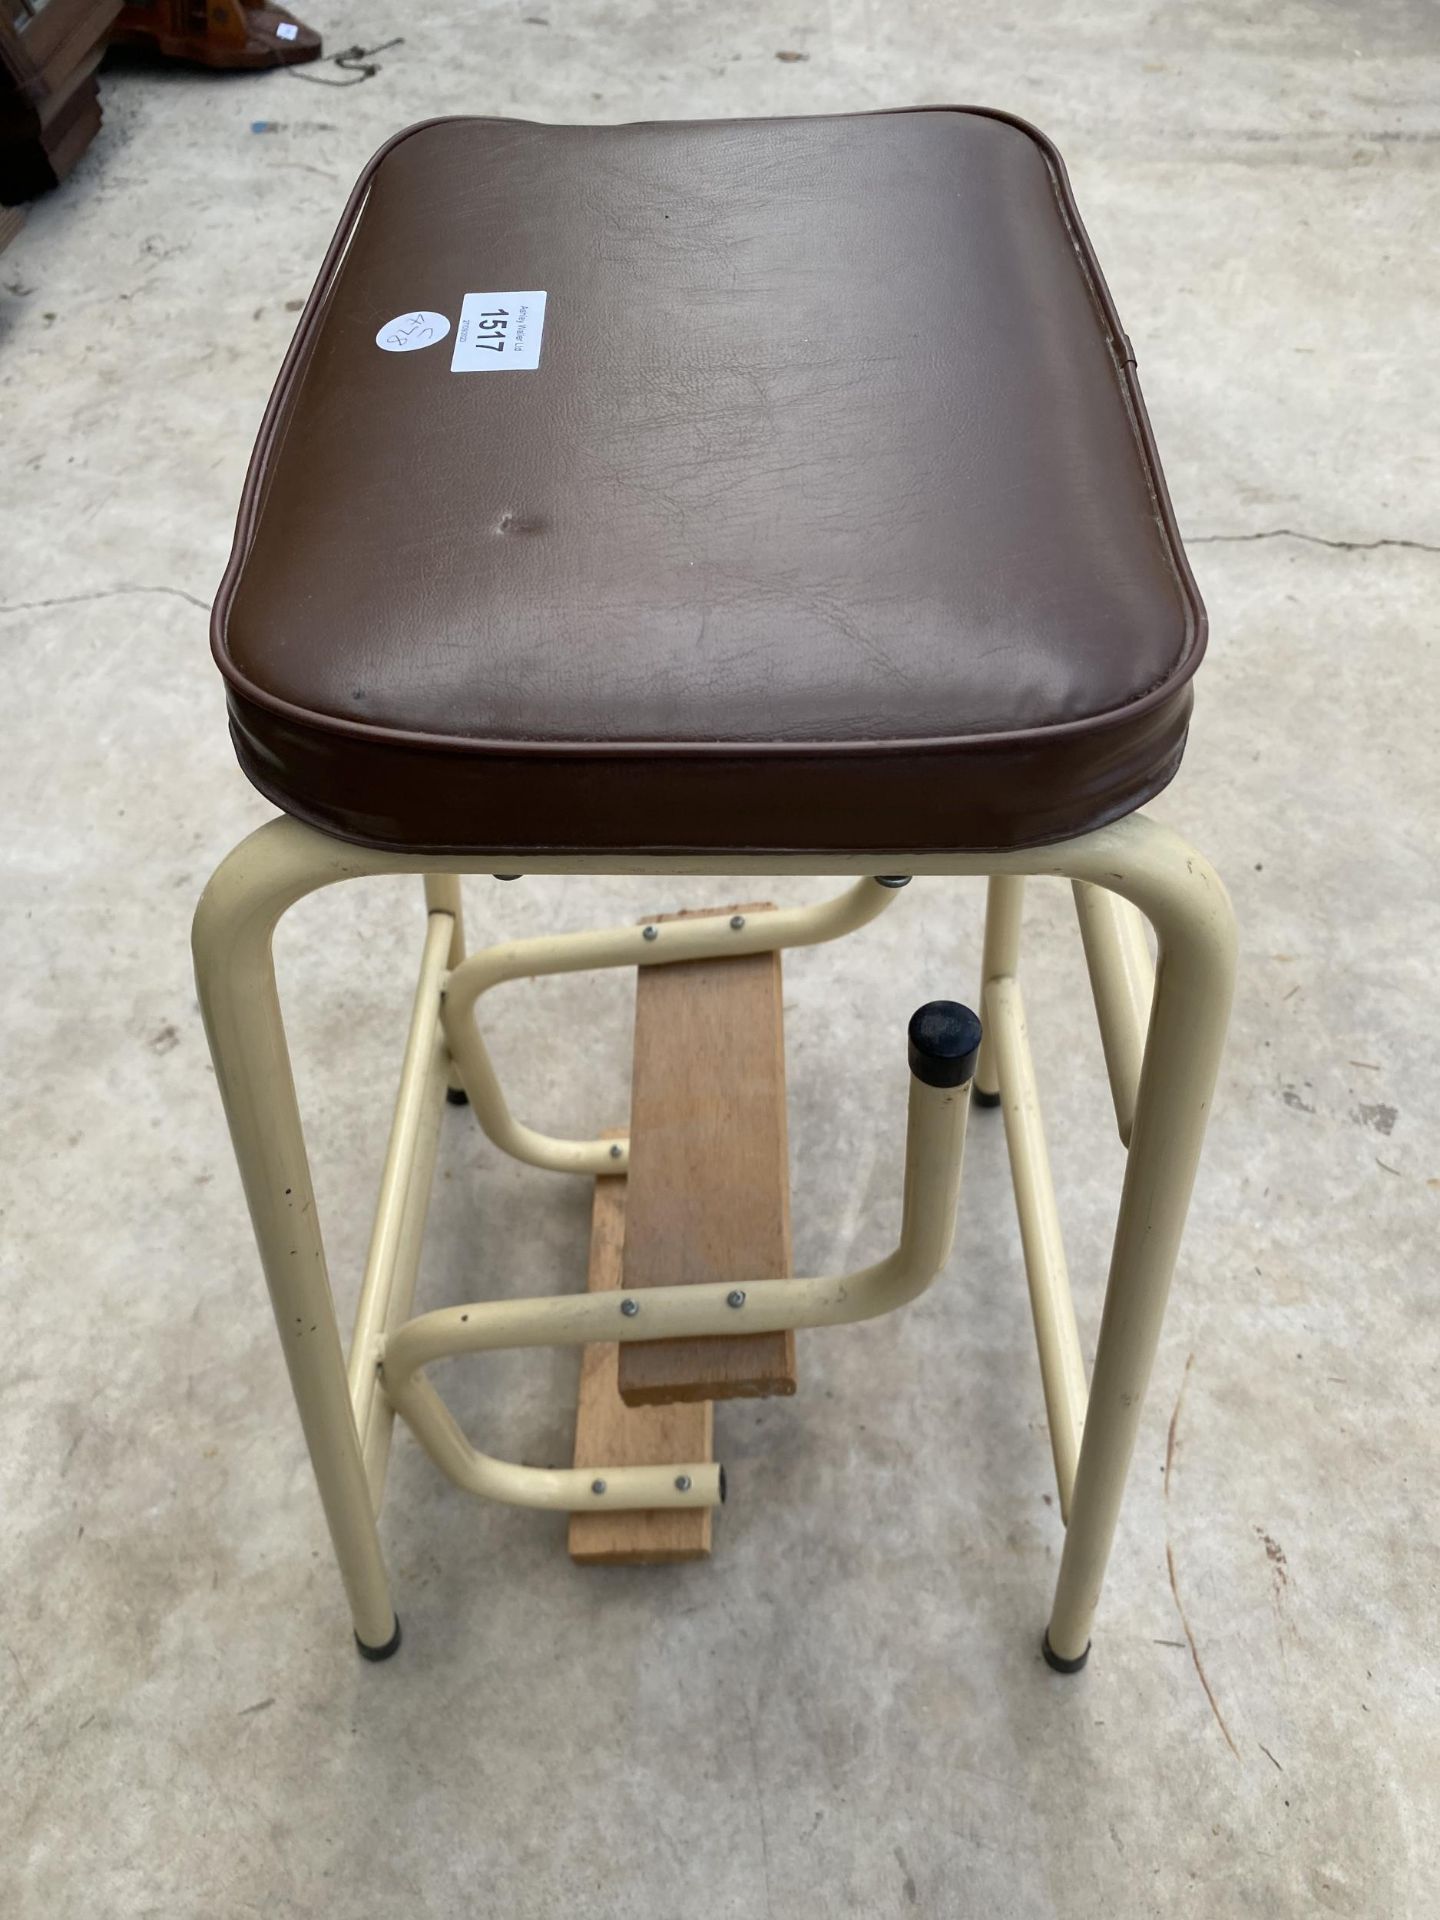 A RETRO MID CENTURY CREAM AND BROWN KITCHEN STEP STOOL - Image 4 of 4